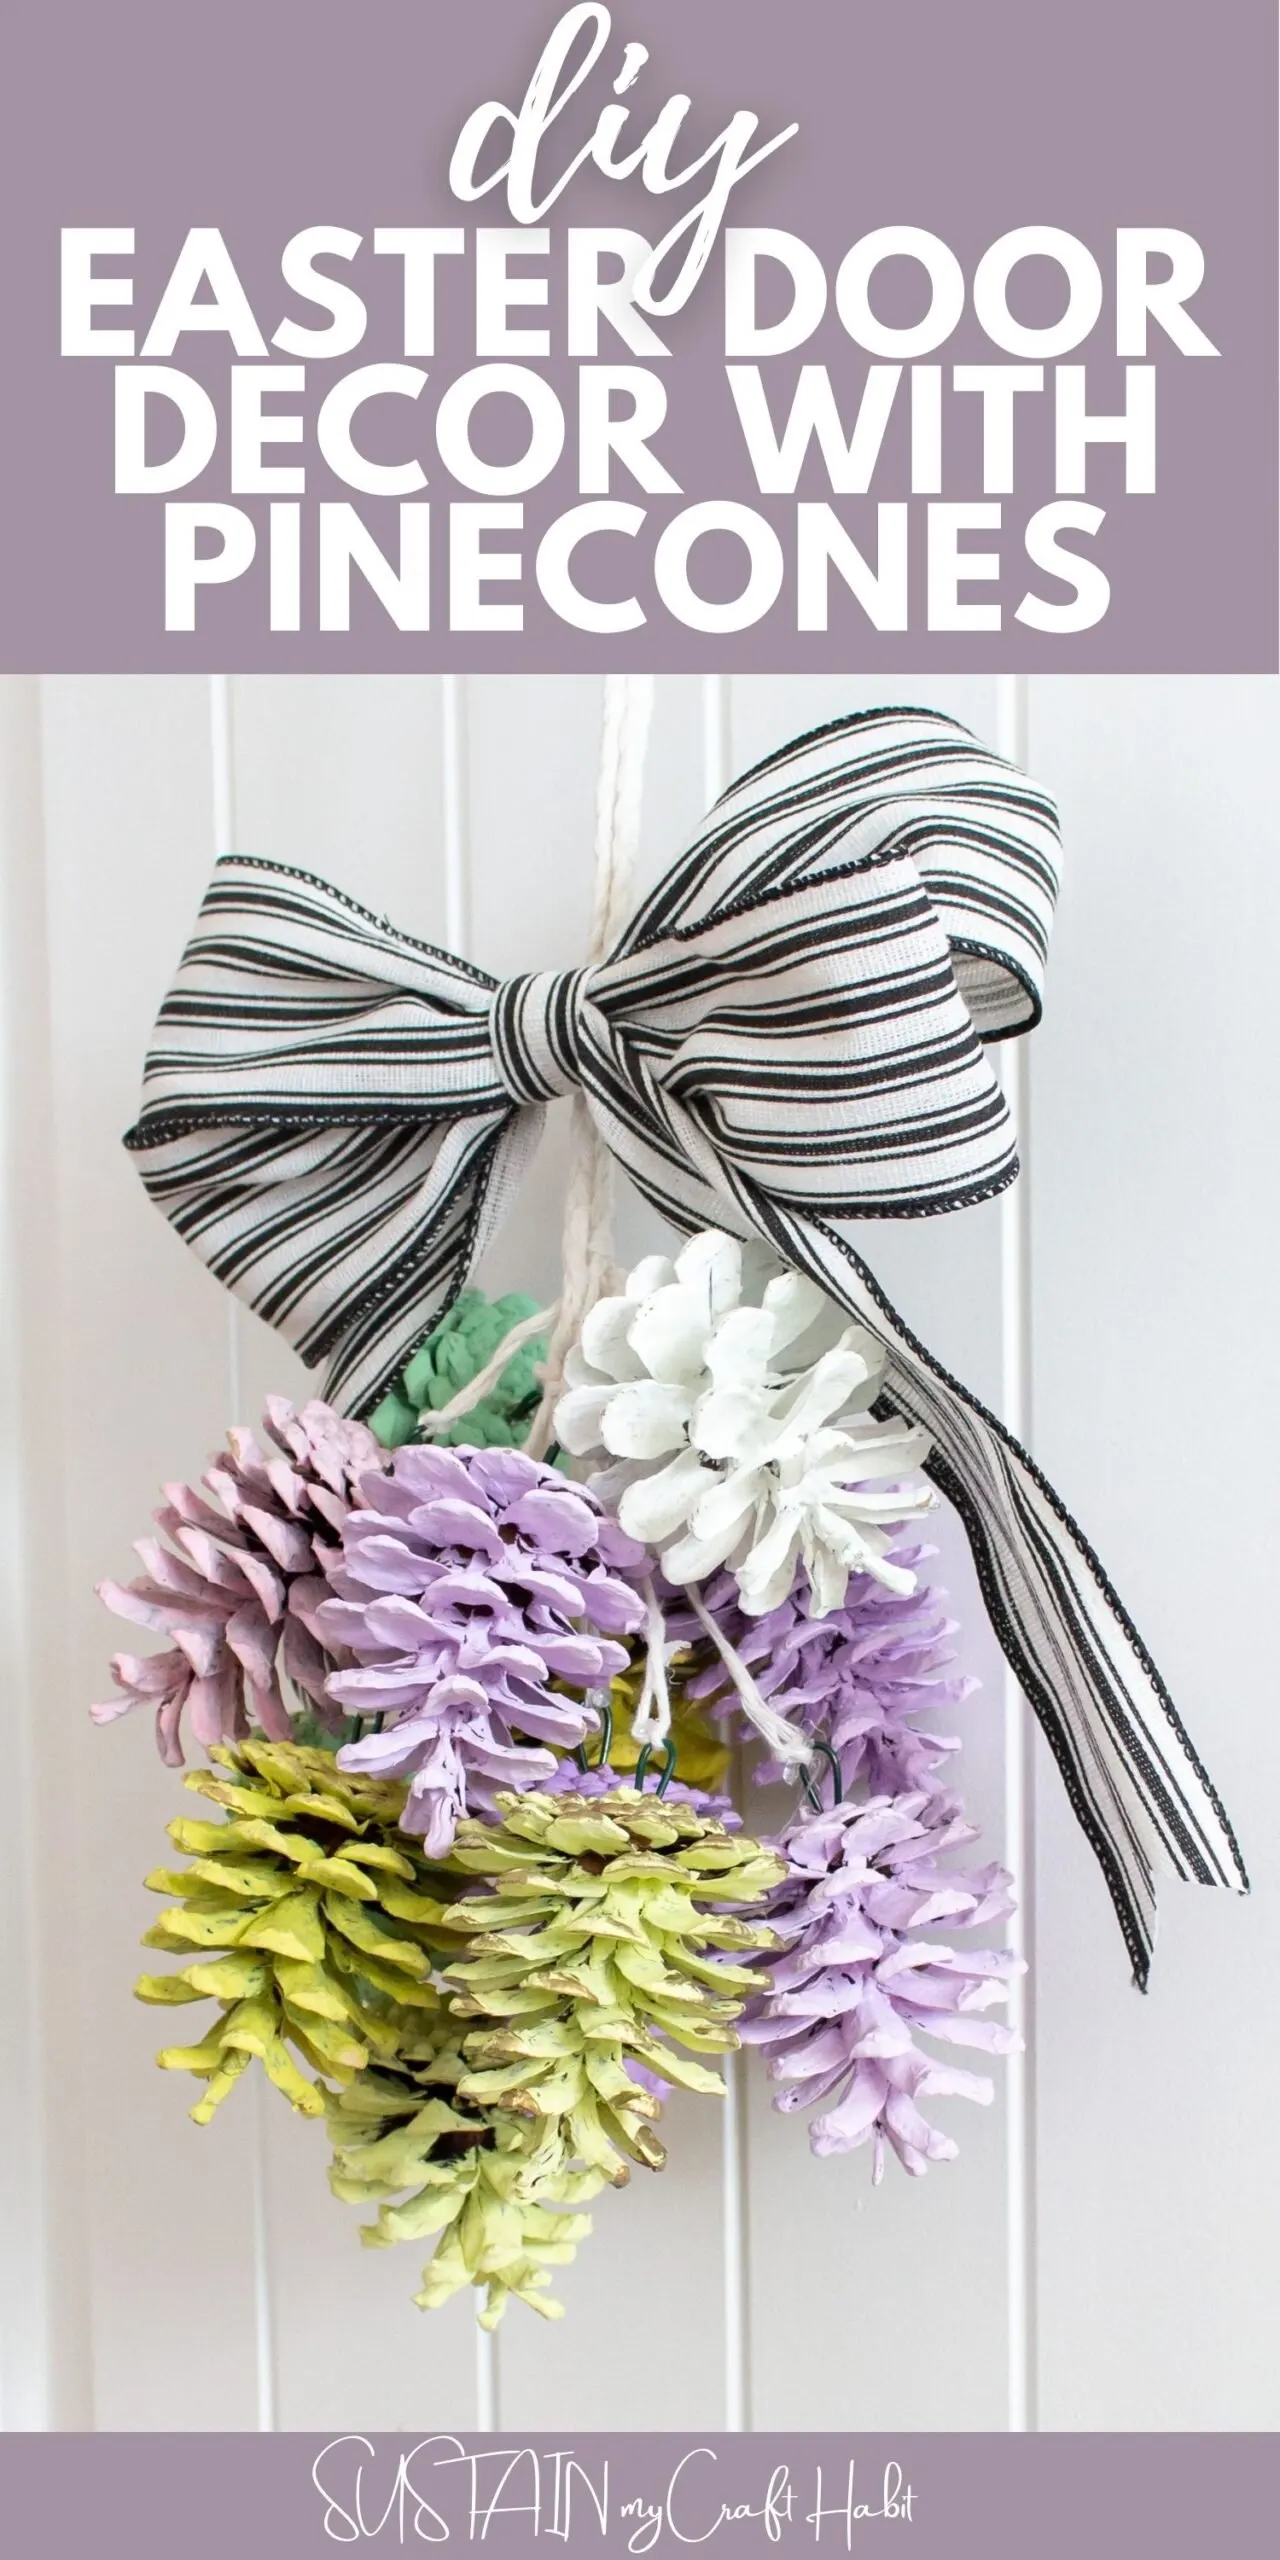 Hanging Easter decor with painted pinecones, twine, ribbon and text overlay.